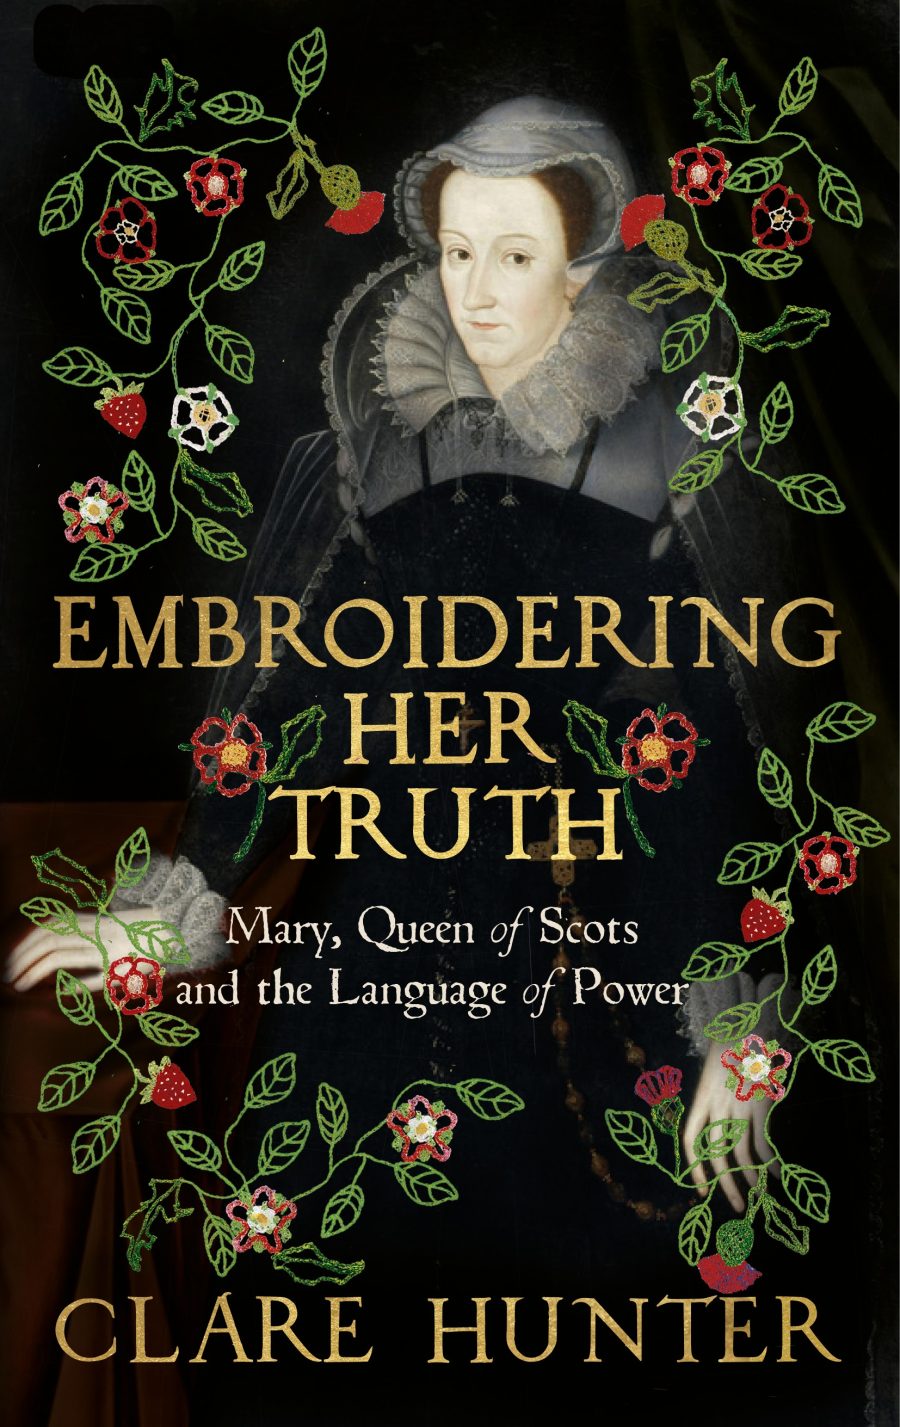 Book cover for 'Embroidering Her Truth' by Clare Hunter. Black background with an  illustration of Mary Queen of Scots surrounded by embroidered flowers.